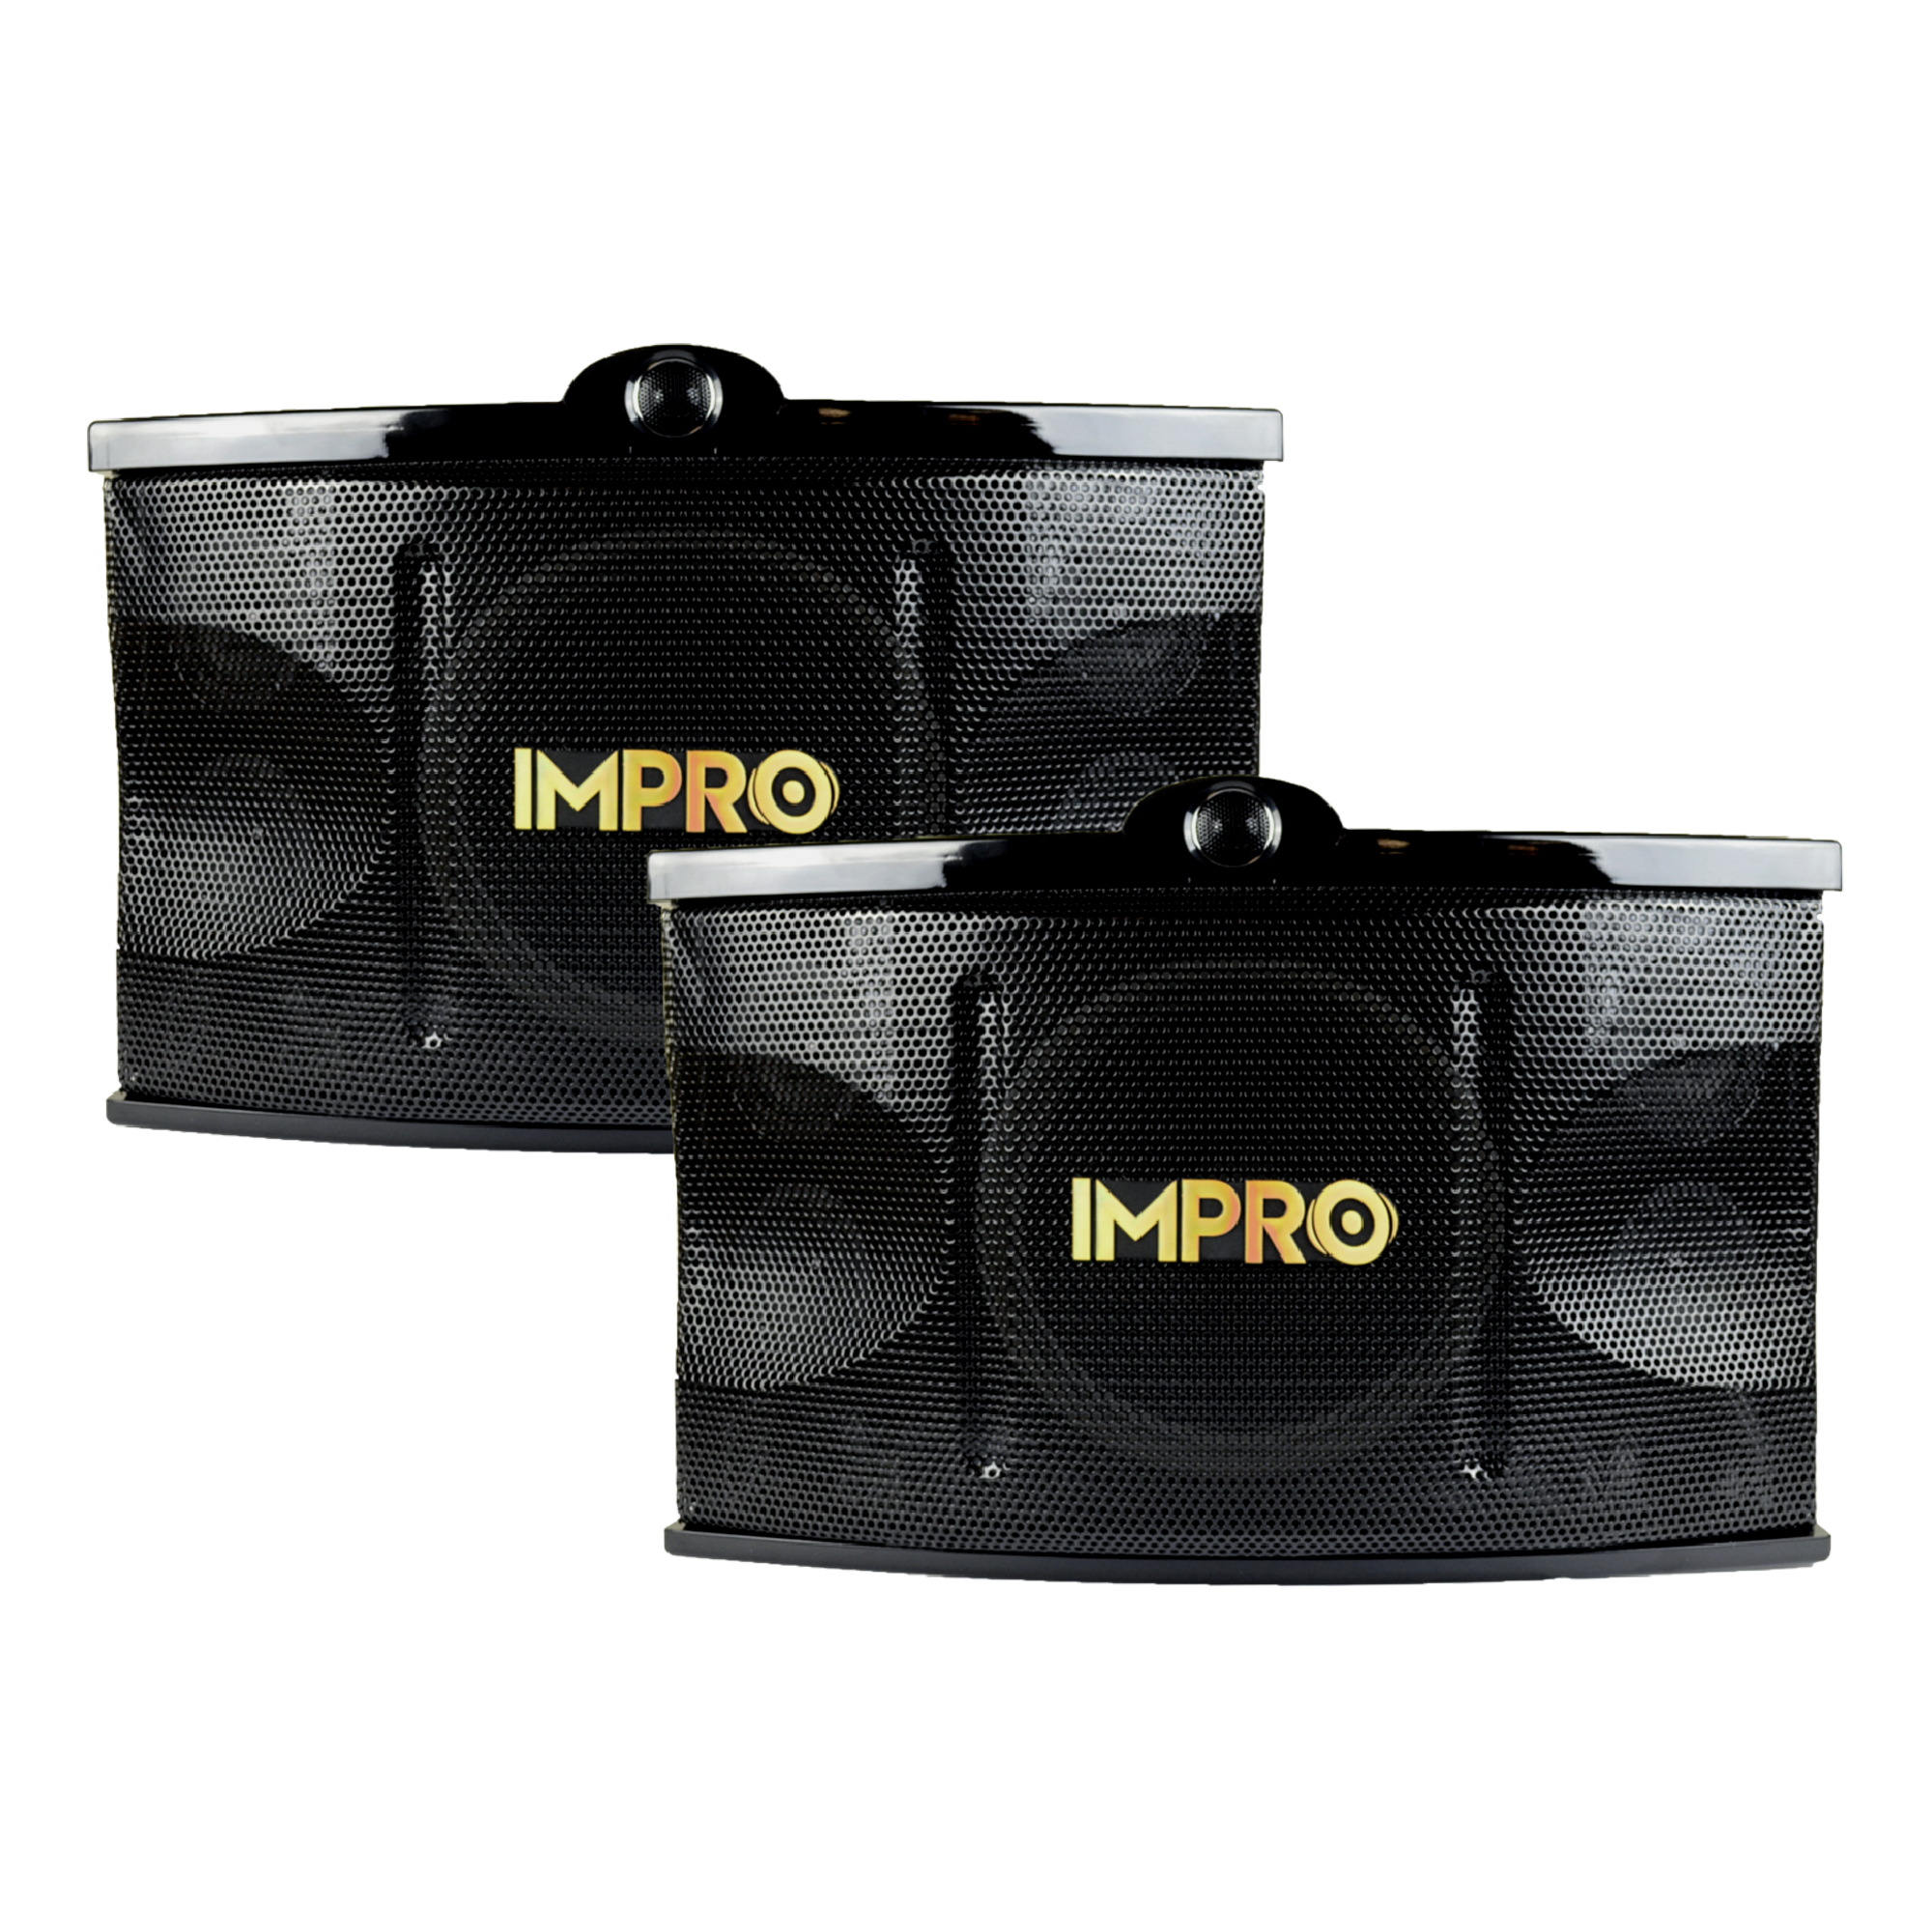 ImPro Epic Party Bundle 2 Plus with Mixing Amplifier, Speakers, Subwoofer, Microphones, and Accessories (6 Items)